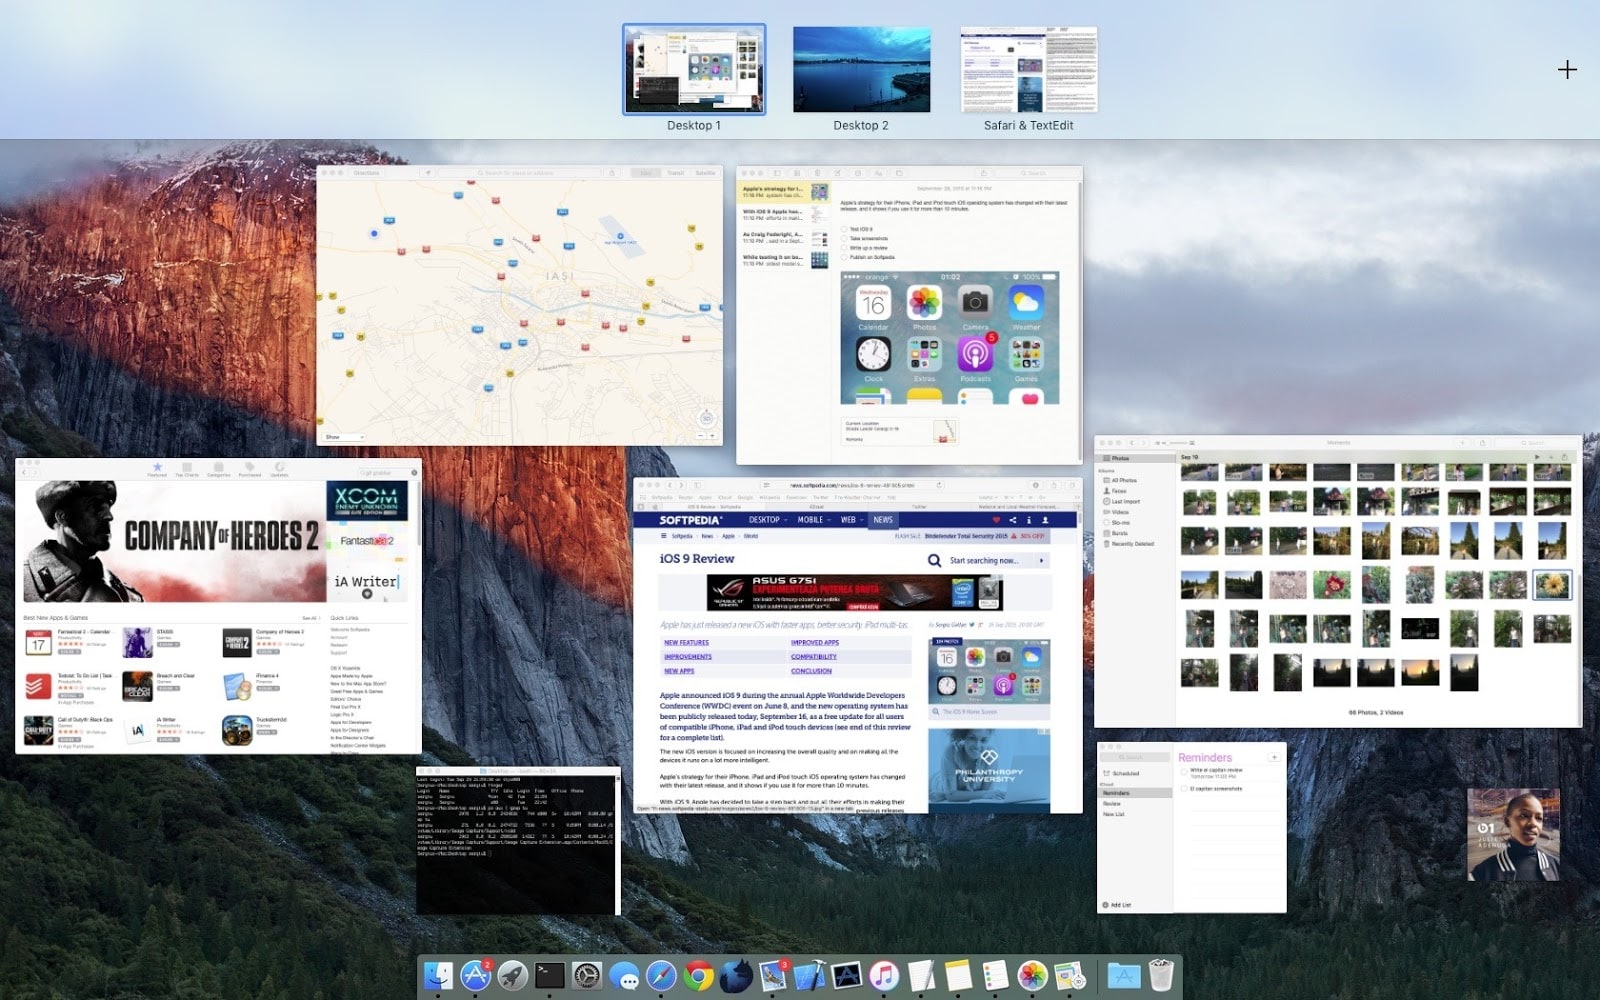 what is the vista driver for a os x elcapitan operating system on a mac